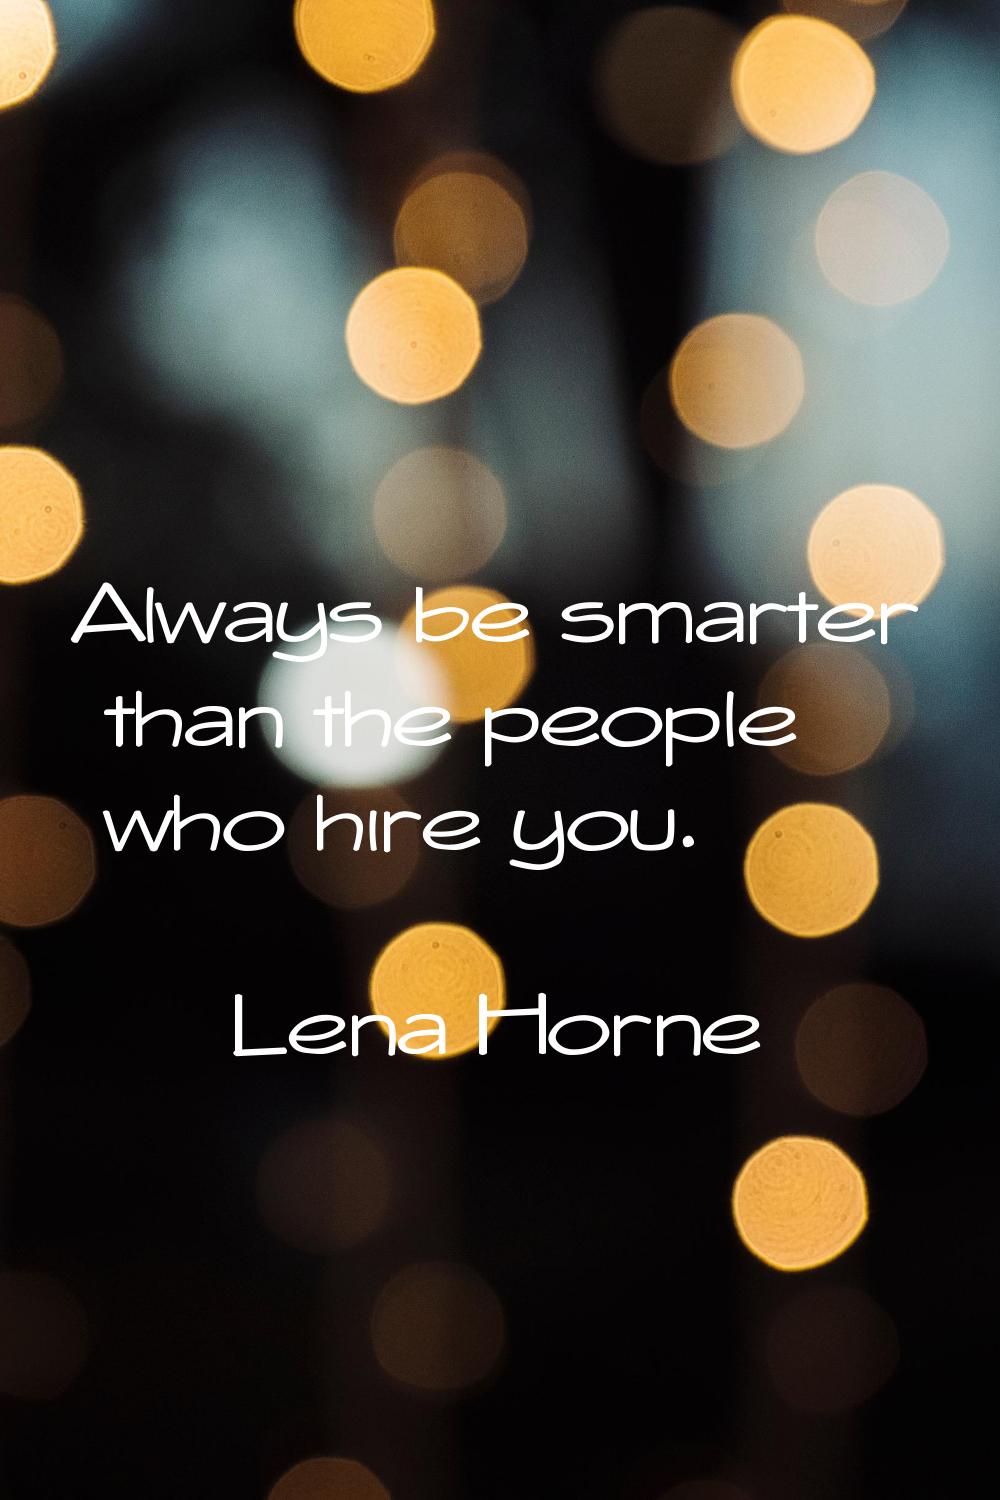 Always be smarter than the people who hire you.